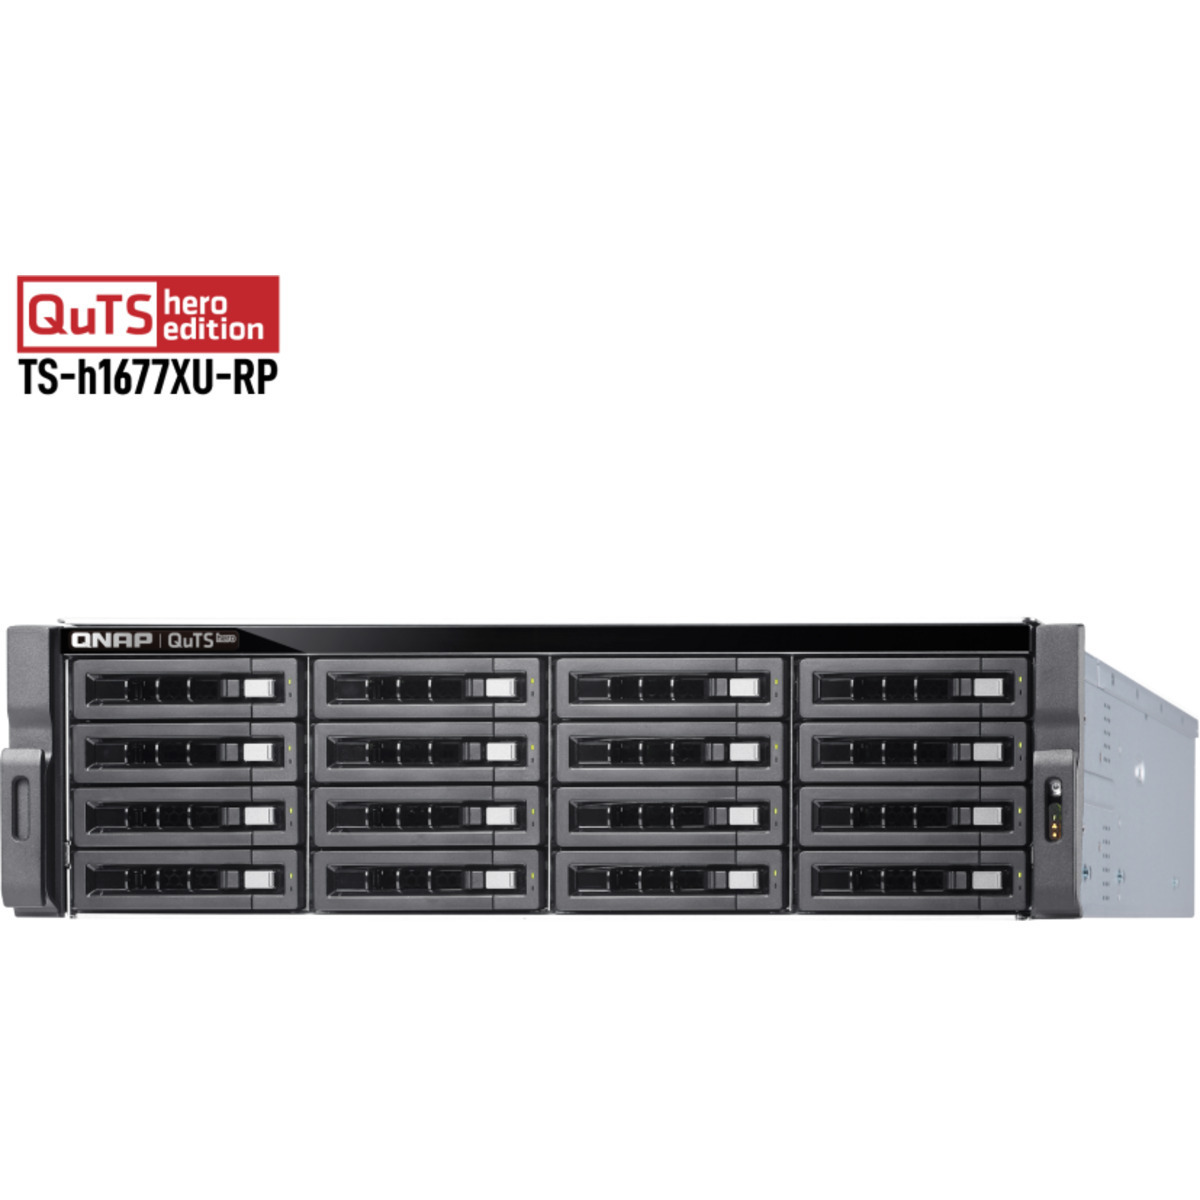 buy $10406 QNAP TS-h1677XU-RP QuTS hero Edition 192tb RackMount NAS - Network Attached Storage Device 16x12000gb Seagate IronWolf Pro ST12000NT001 3.5 7200rpm SATA 6Gb/s HDD NAS Class Drives Installed - Burn-In Tested - nas headquarters buy network attached storage server device das new raid-5 free shipping simply usa TS-h1677XU-RP QuTS hero Edition